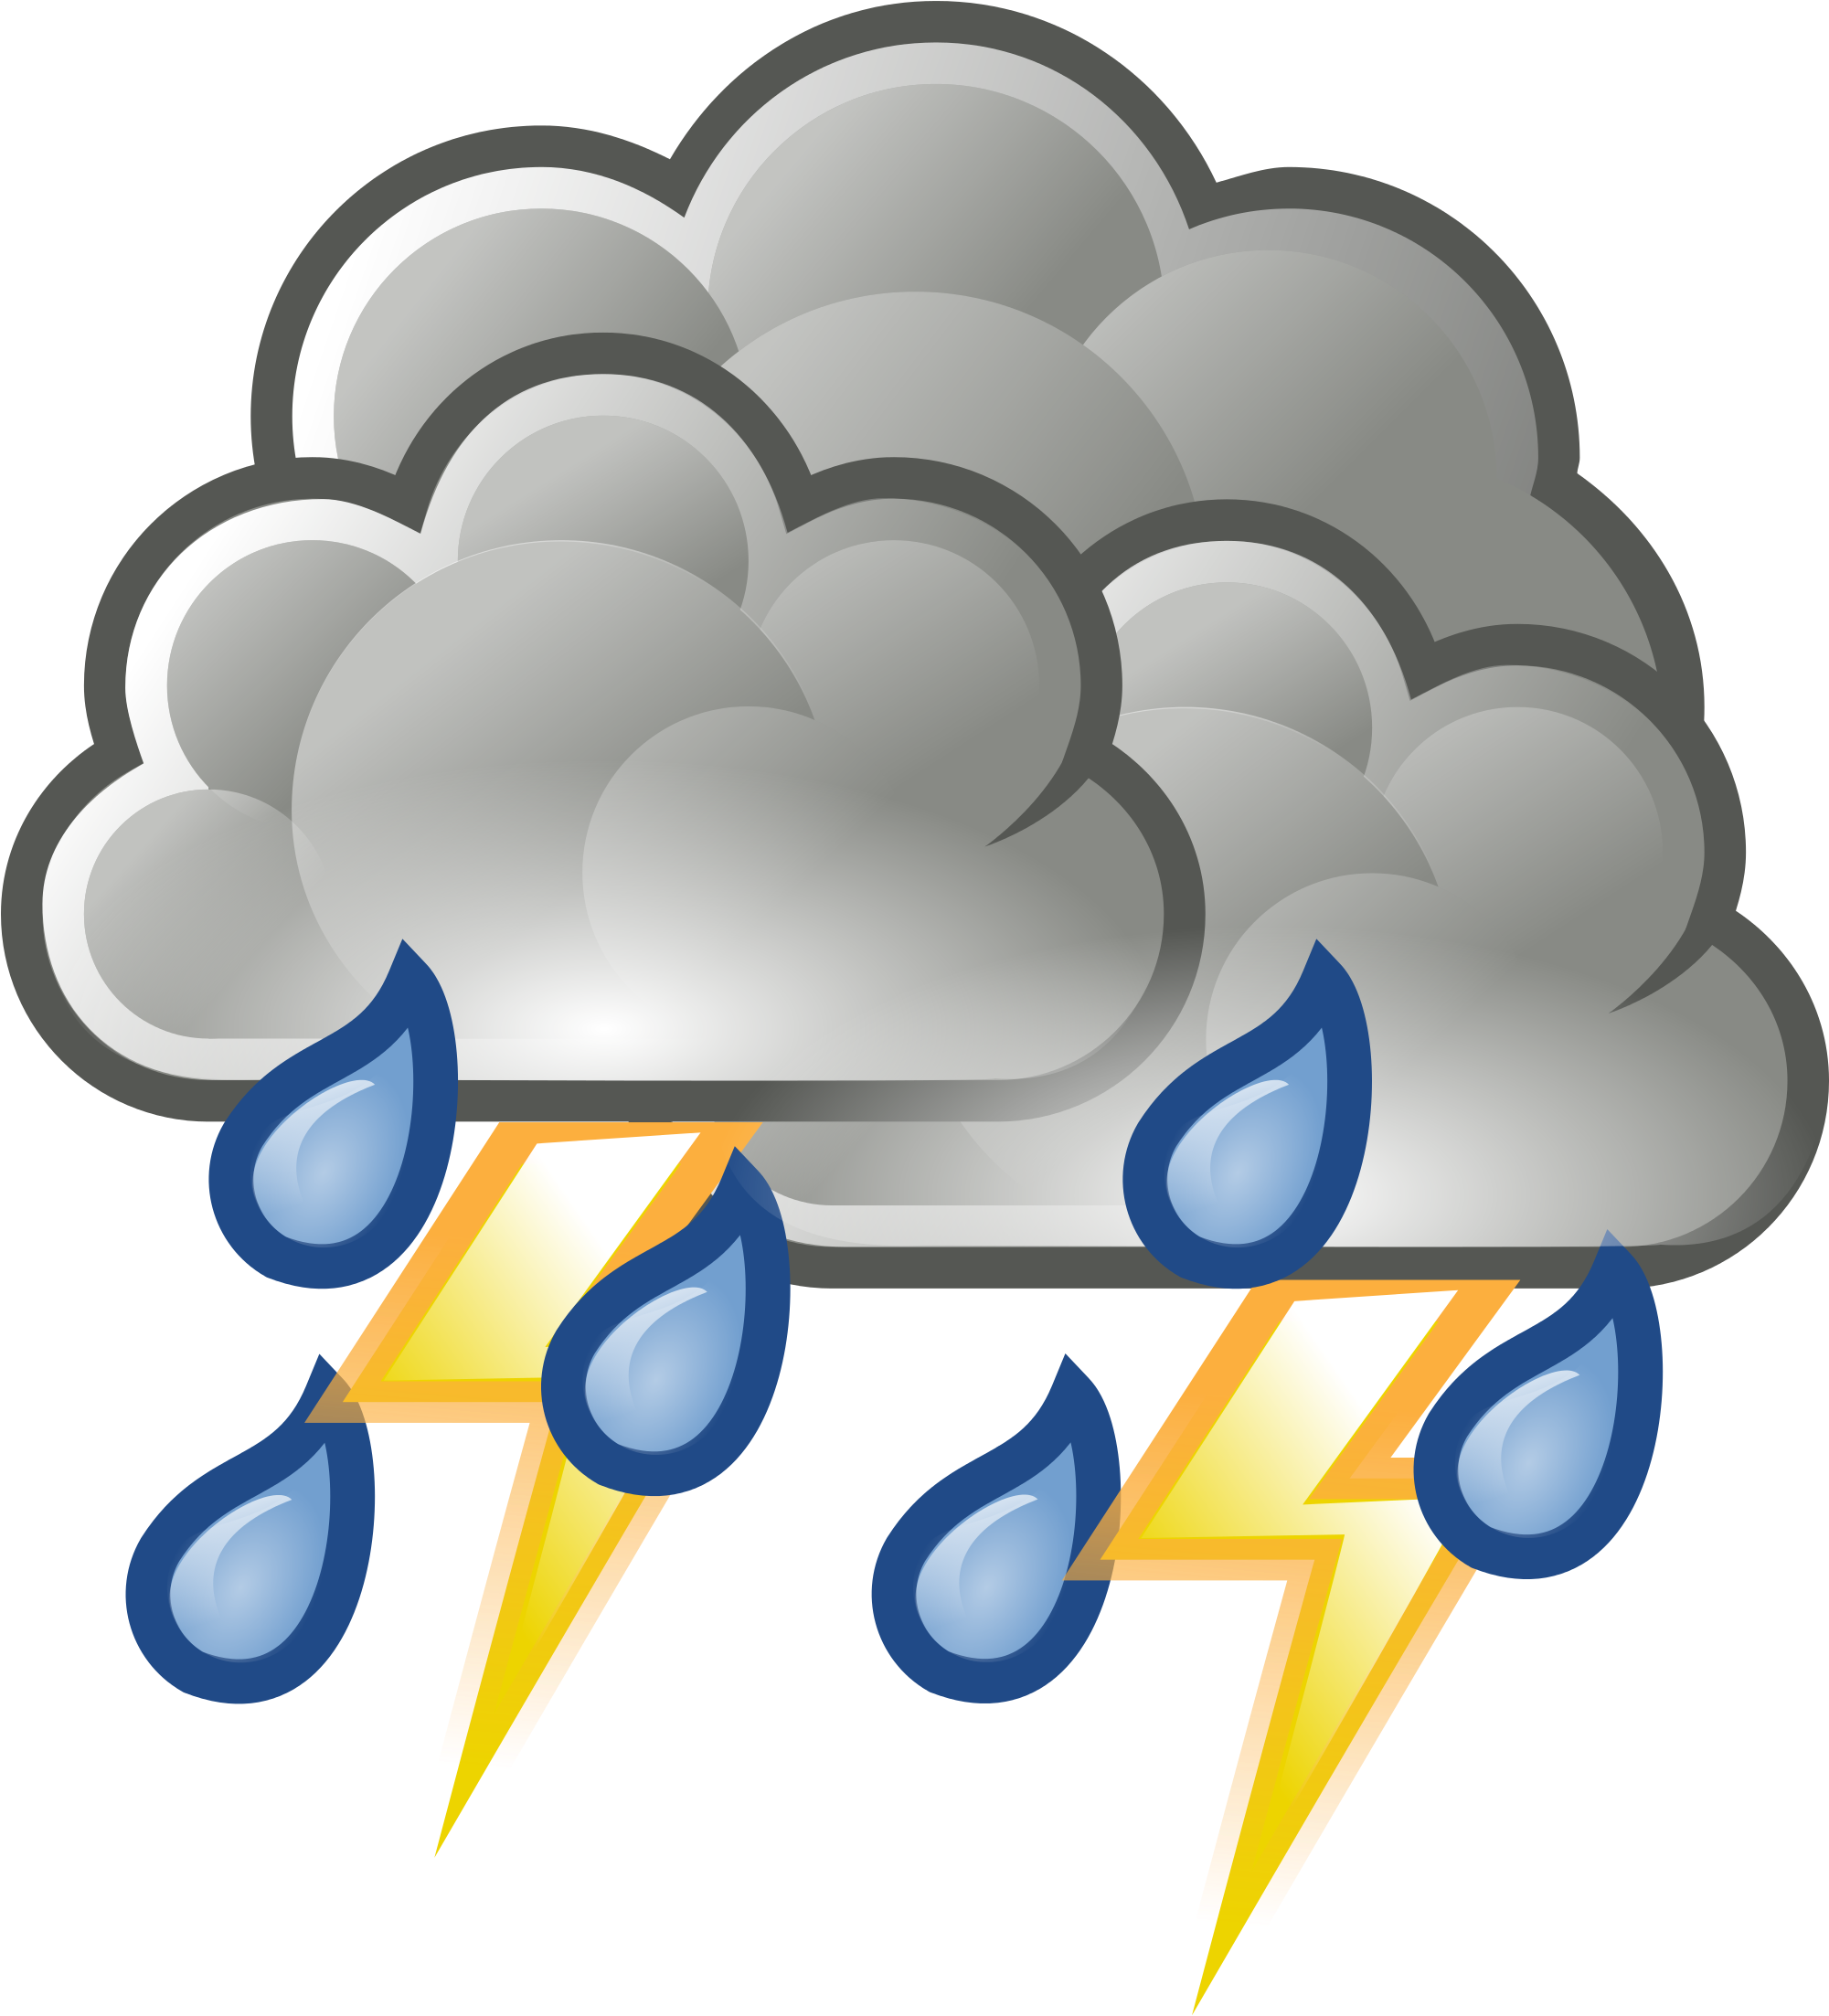 Download and share clipart about Related Storm Clipart Png - Thunderstorm W...